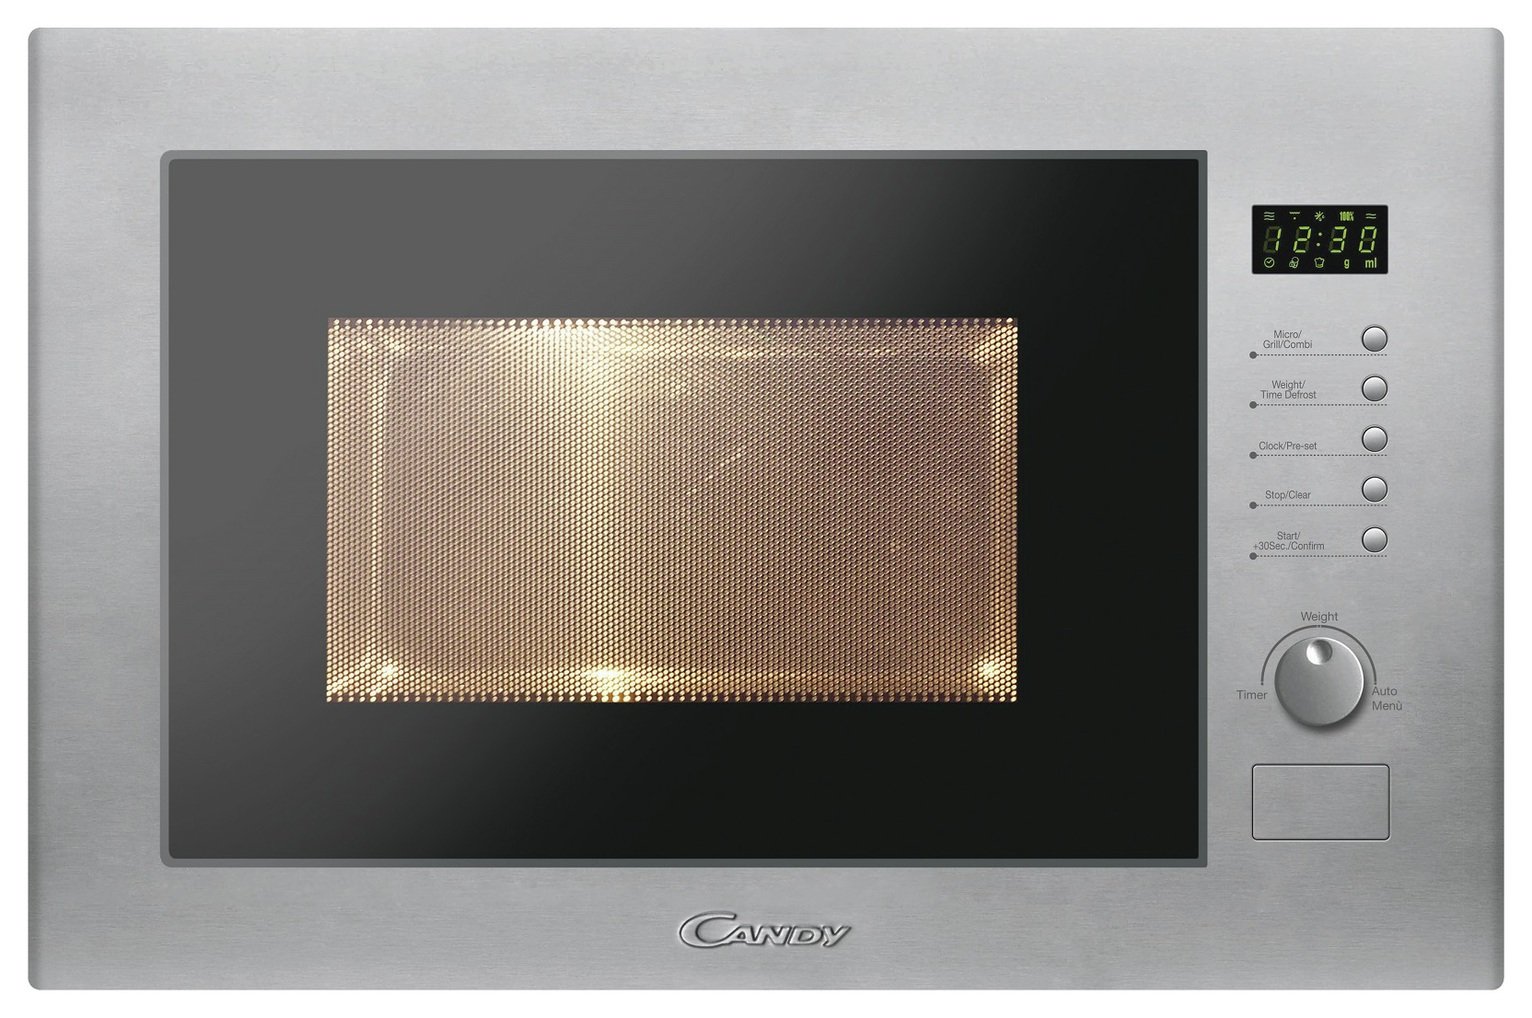 Candy MIC25GDFX 900W Microwave - Stainless Steel